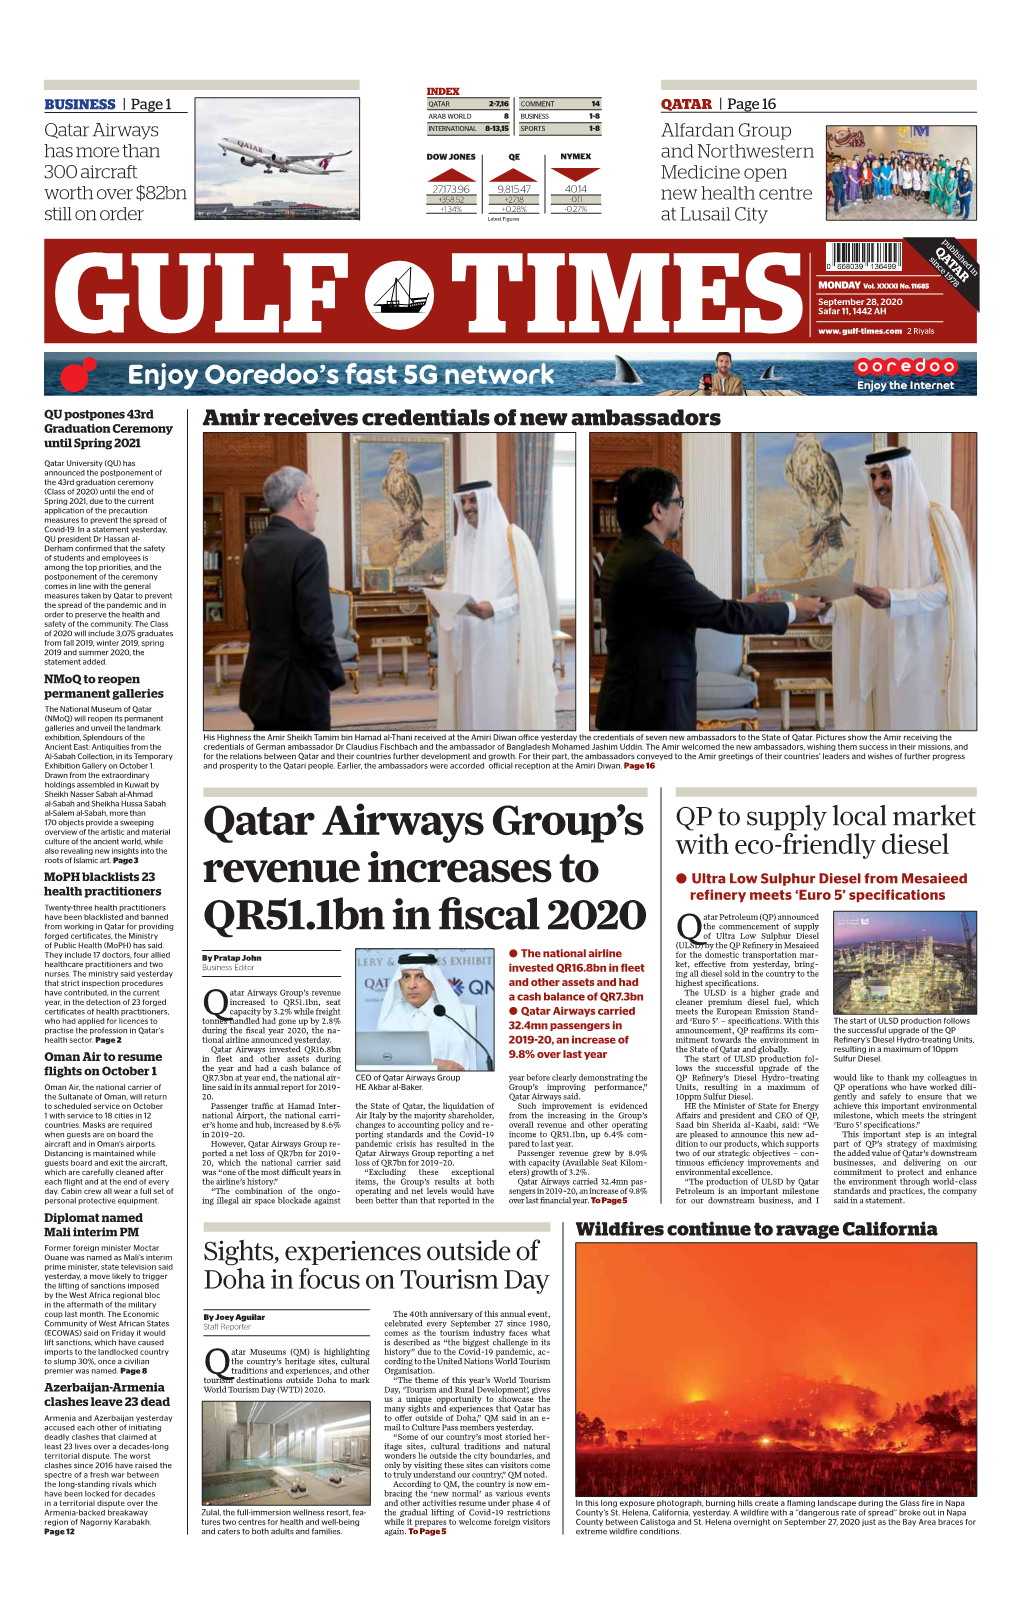 Qatar Airways Group's Revenue Increases to QR51.1Bn in Fiscal 2020